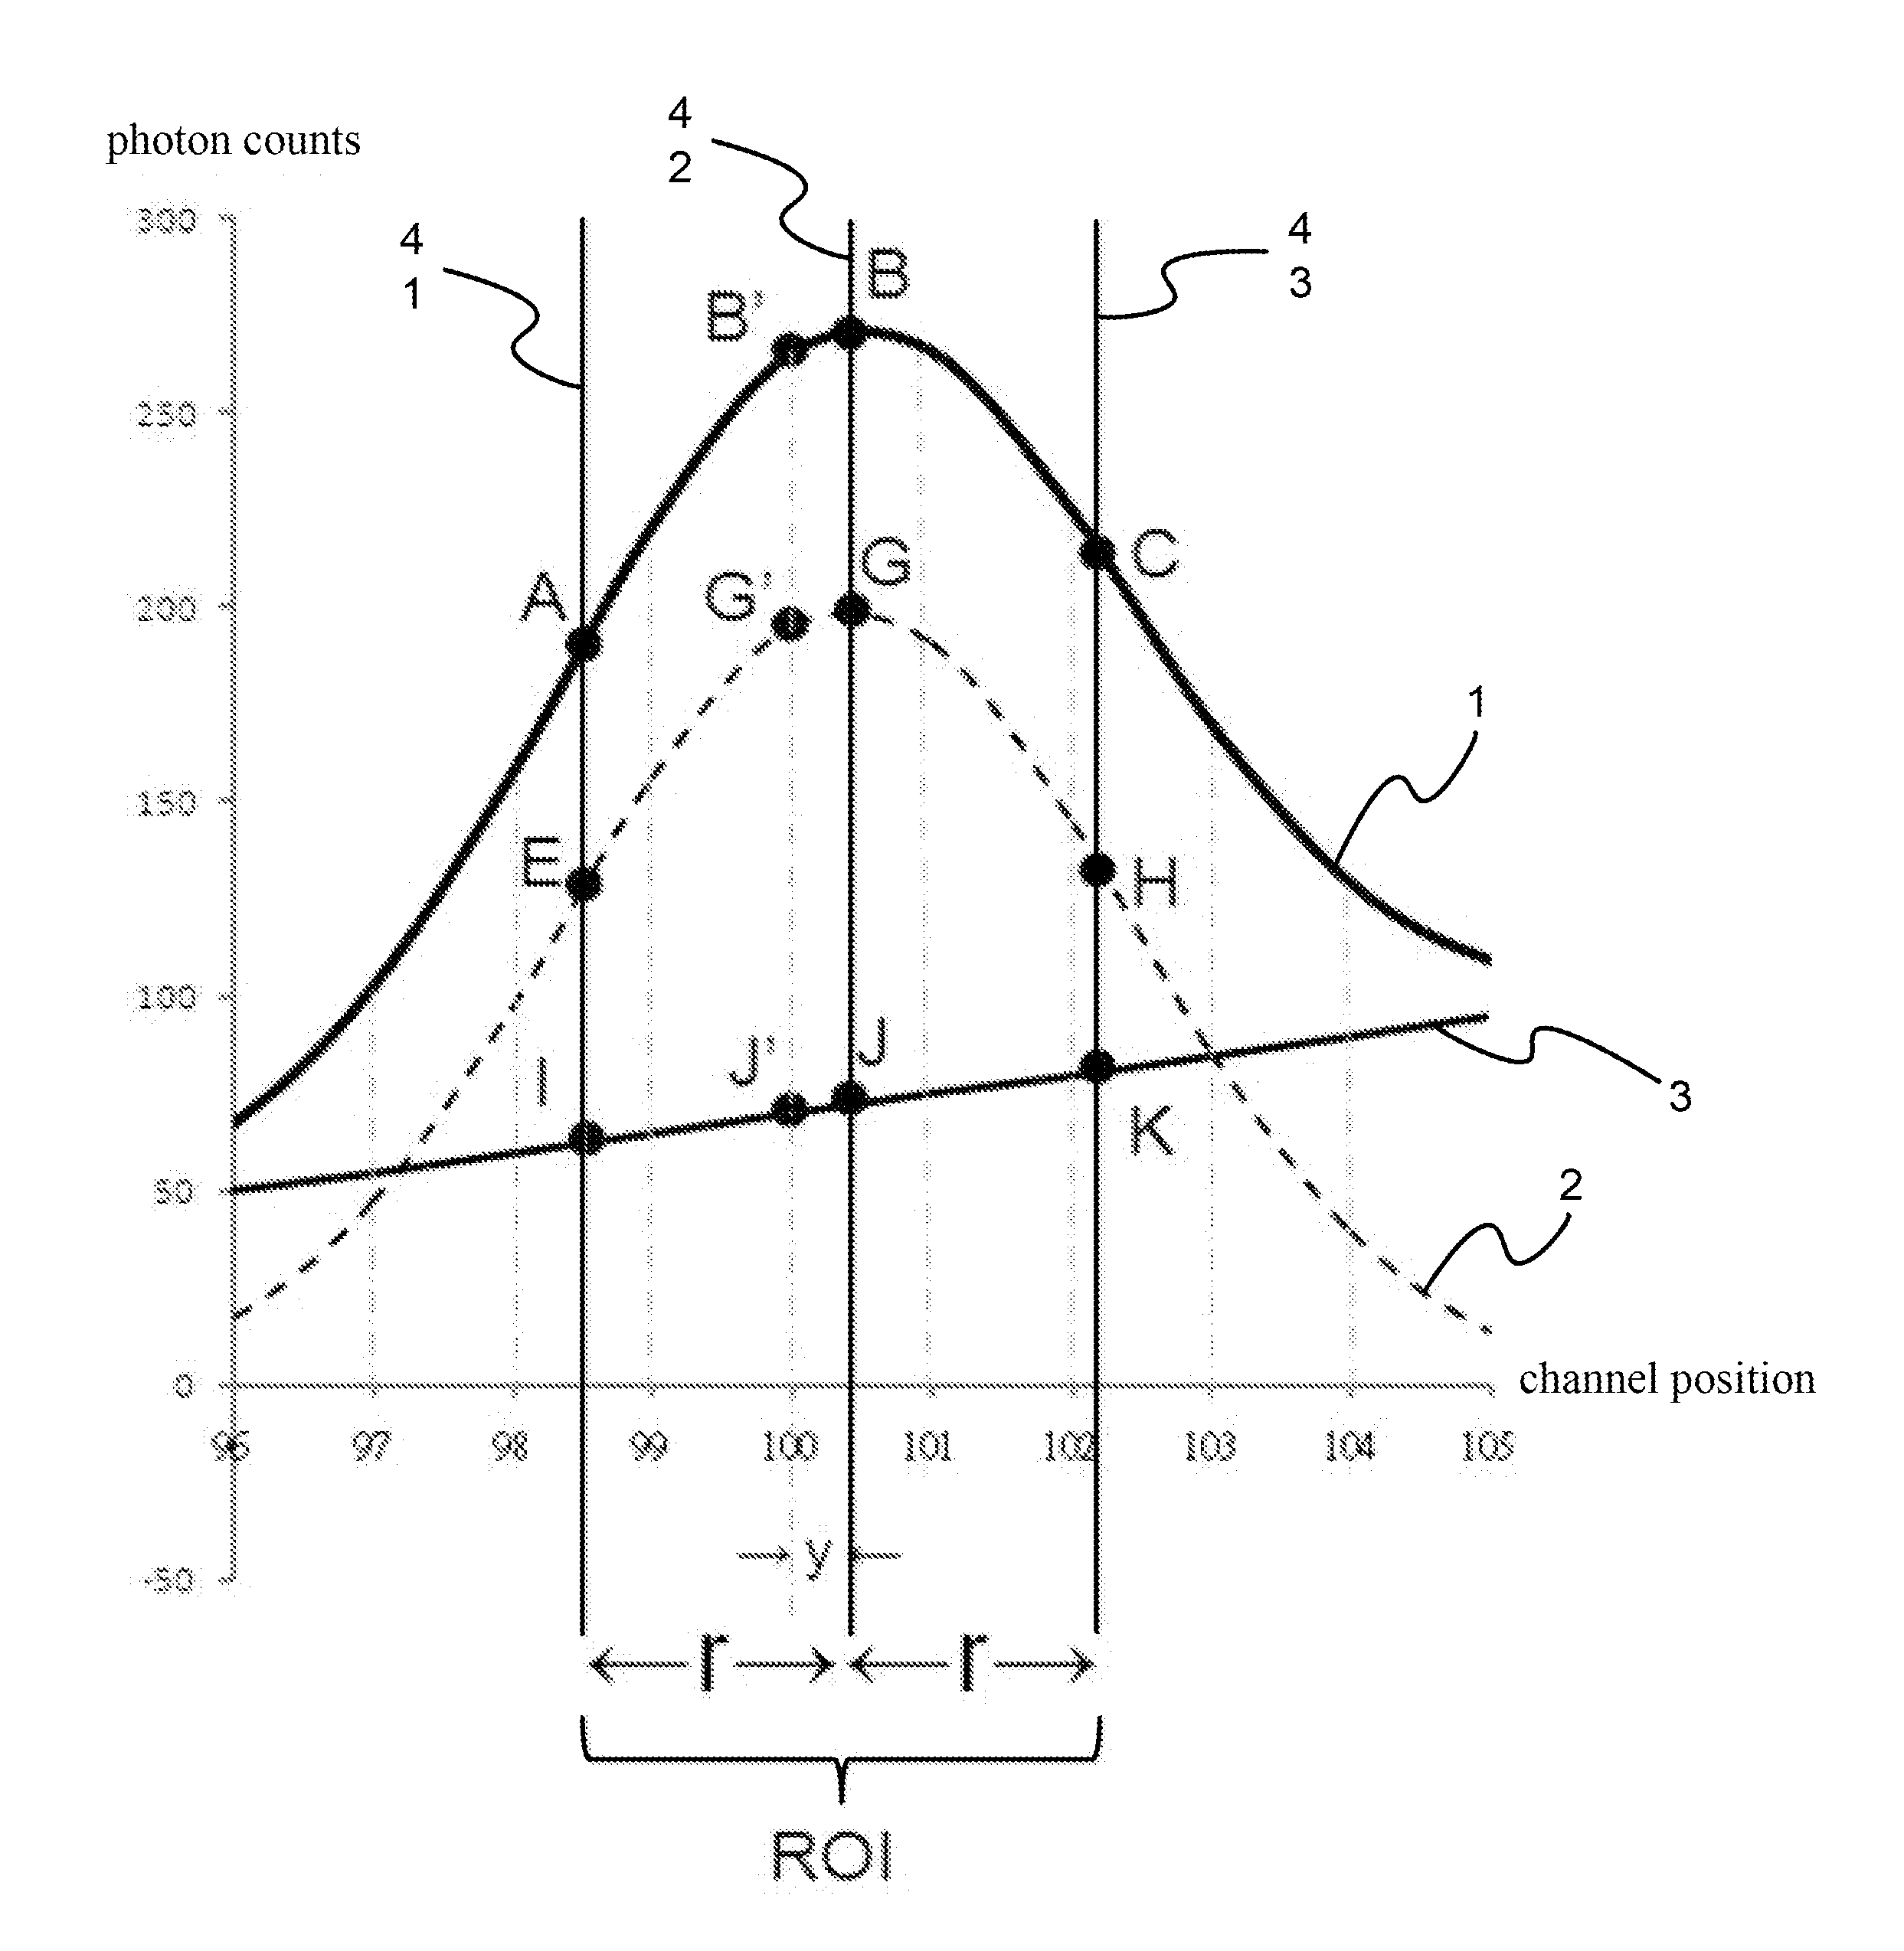 Method for Acquiring Nuclide Activity with High Nuclide Identification Ability Applicable to Spectroscopy Measured from Sodium Iodide Detector